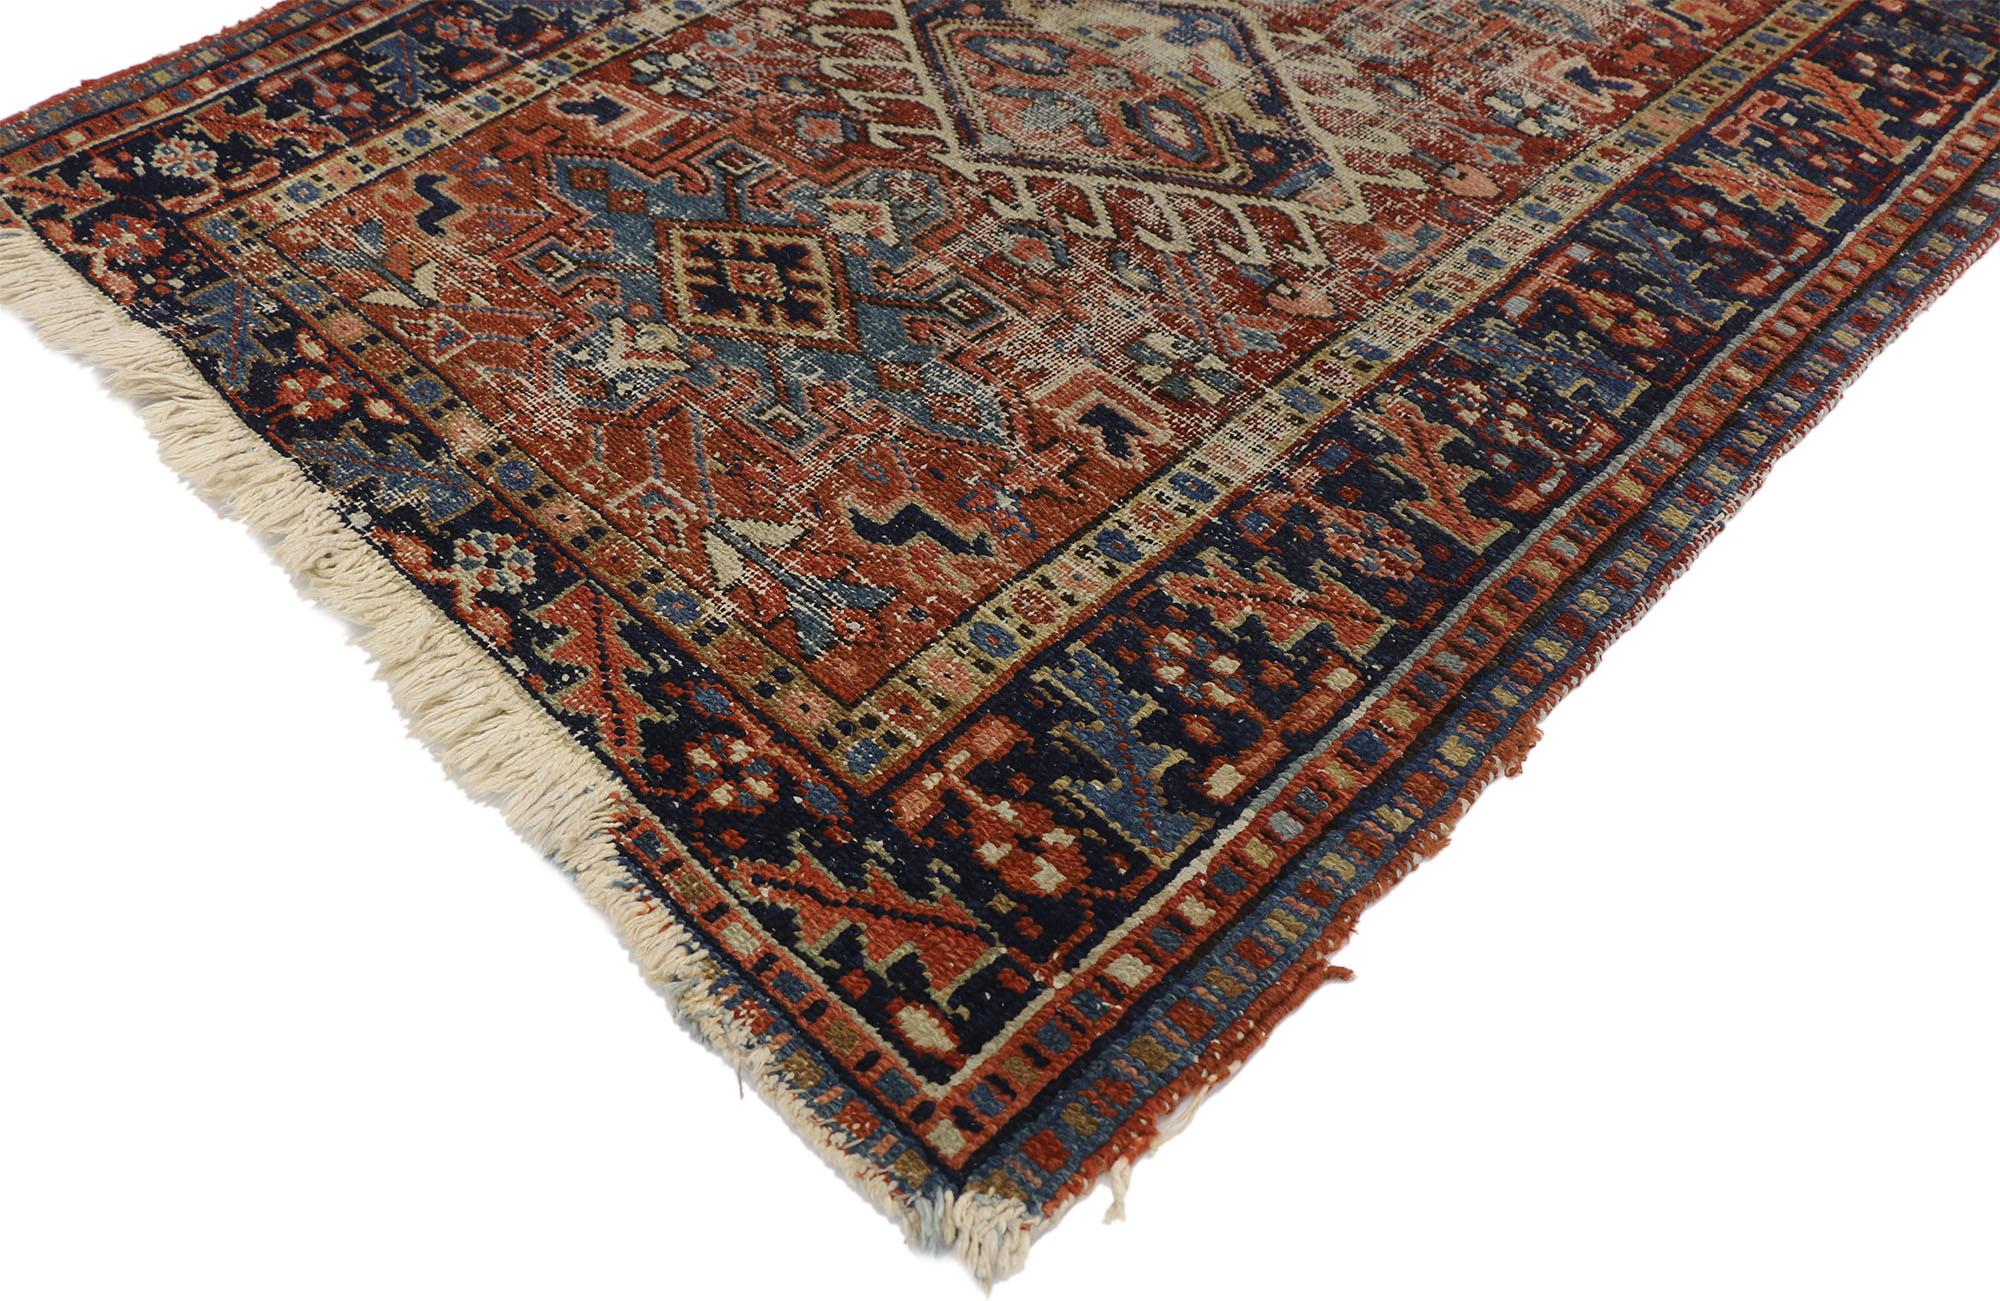 77244, distressed antique Persian Heriz Karaja rug. With architectural biophilia elements combined naturalistic forms, this hand knotted wool distressed antique Persian Heriz rug embodies a rustic Artisan style with MCM vibes. This antique Persian